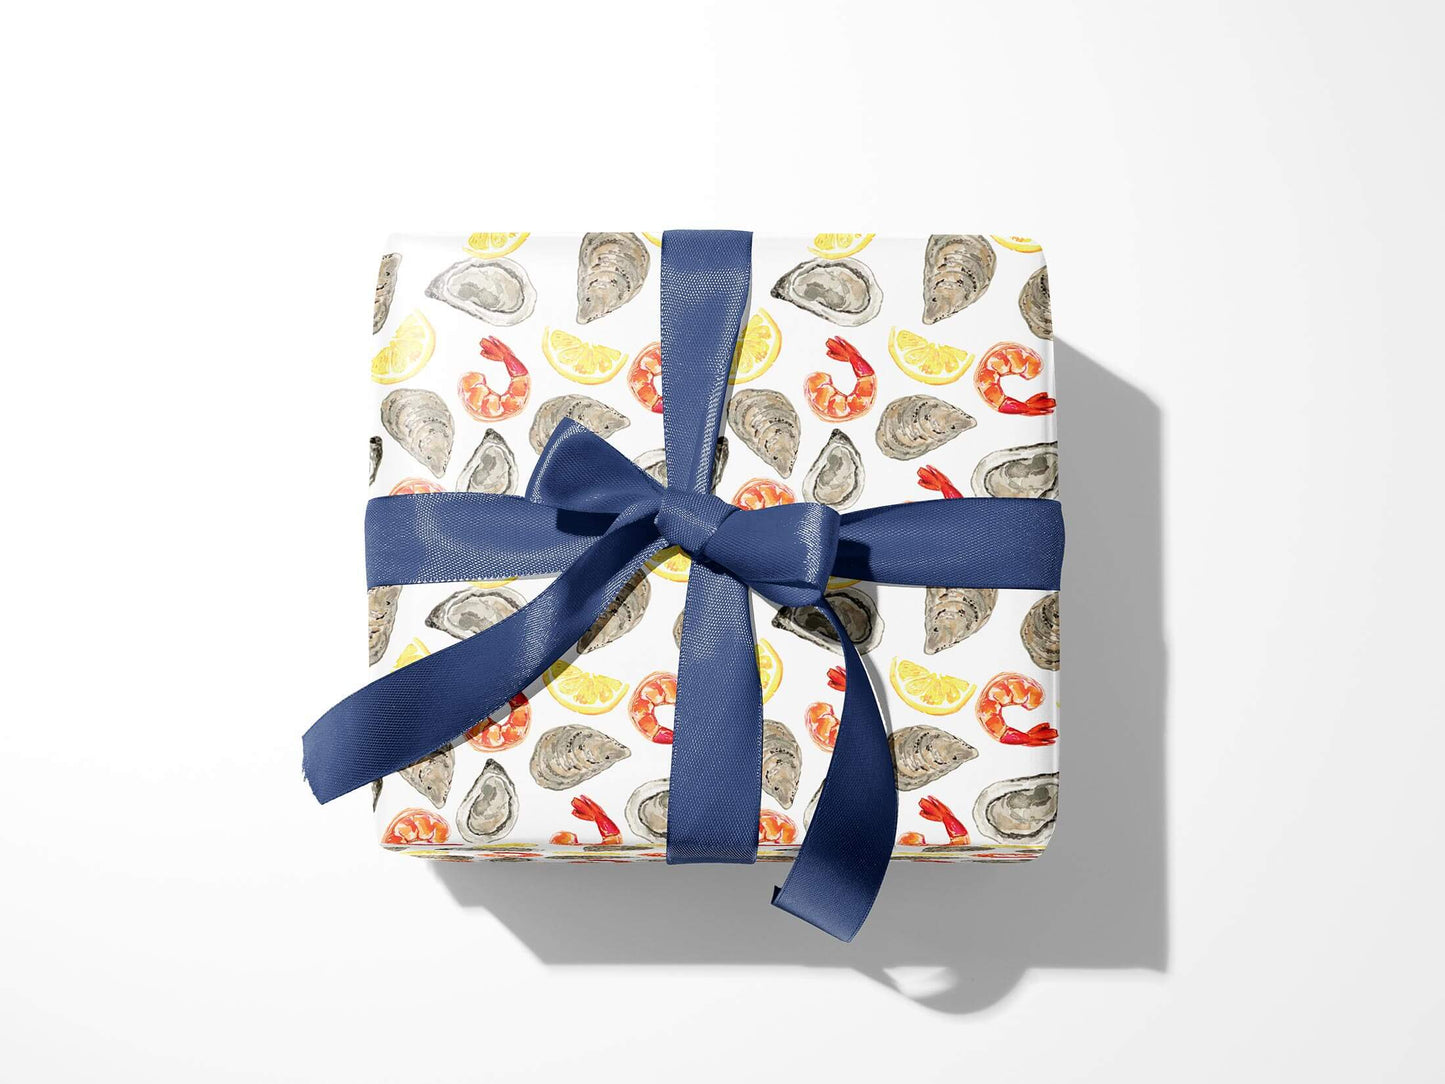 Box wrapped in wrapping paper designed with oysters, shrimp and lemon wedges all over and blue ribbon tied into a bow on top 